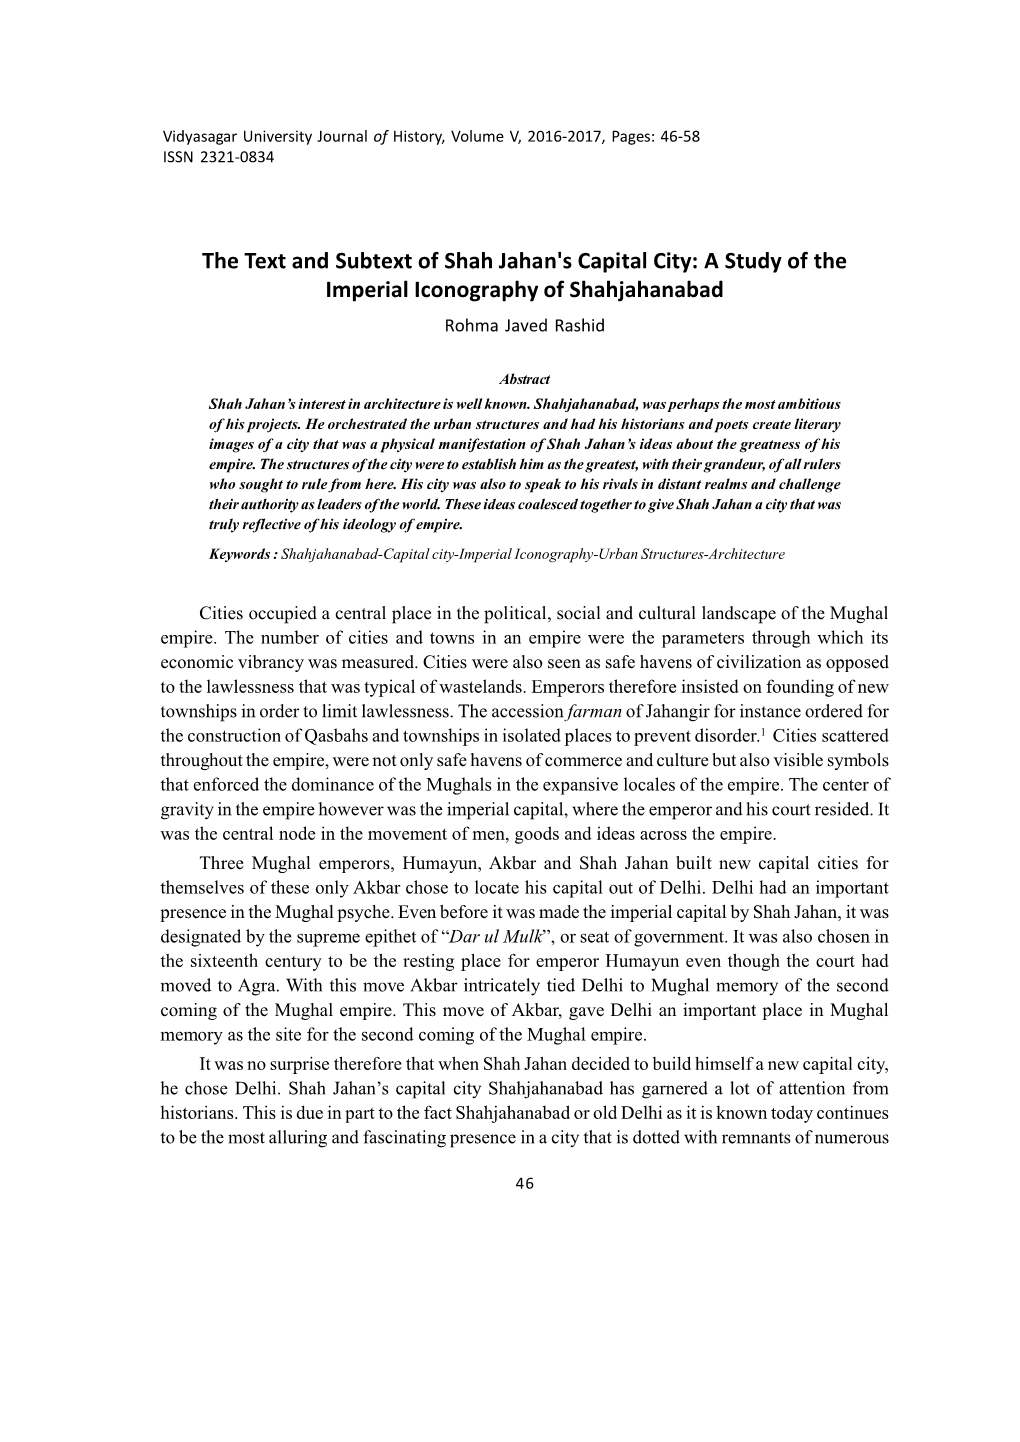 The Text and Subtext of Shah Jahan's Capital City: a Study of the Imperial Iconography of Shahjahanabad Rohma Javed Rashid